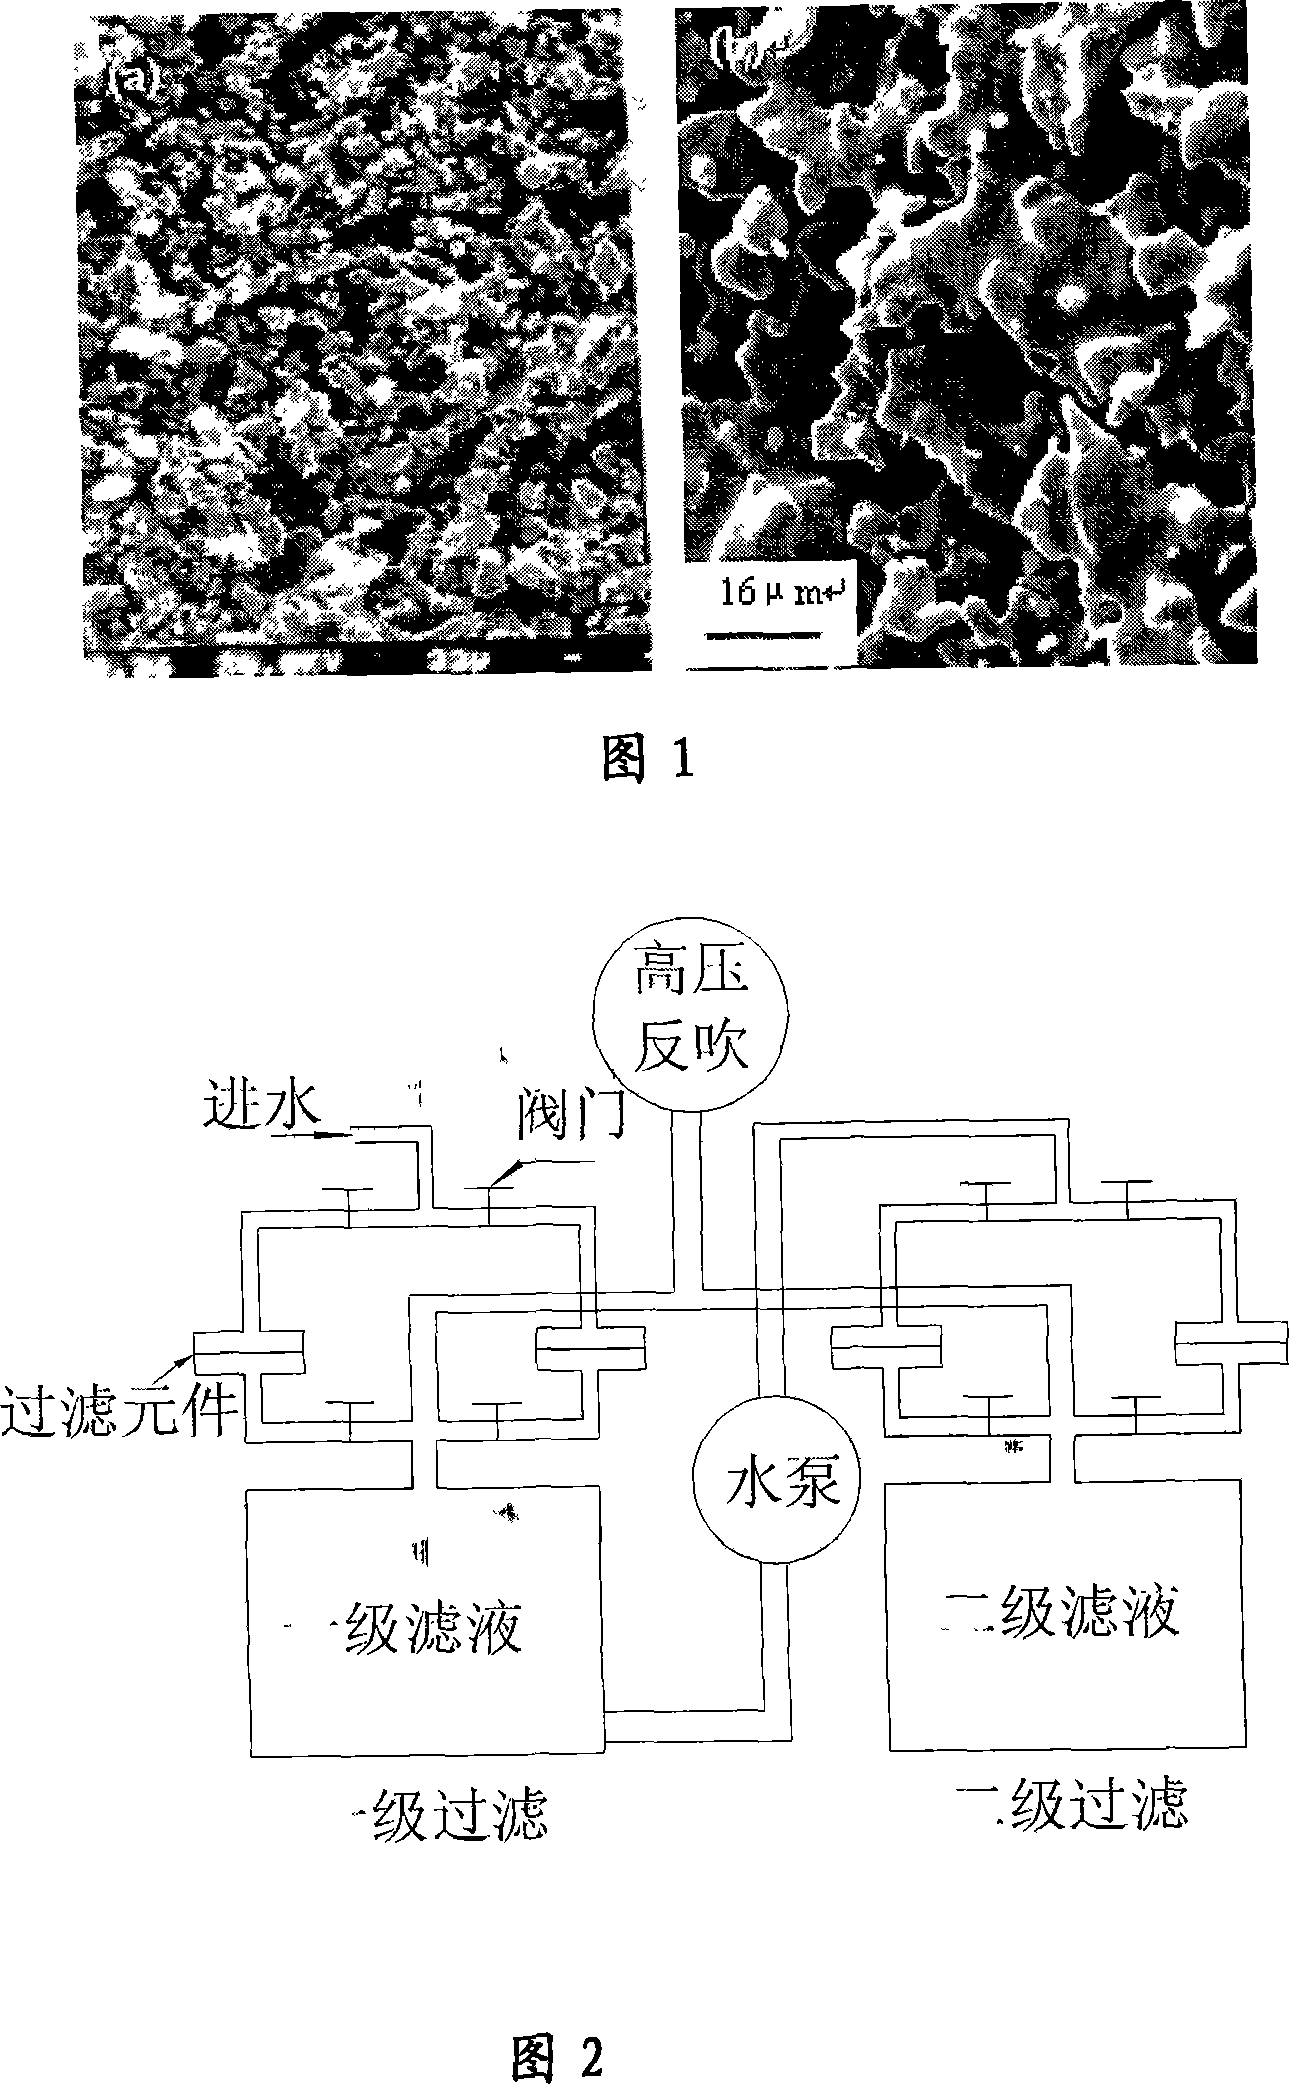 Method and system for processing wastewater of cleaning printed circuit board